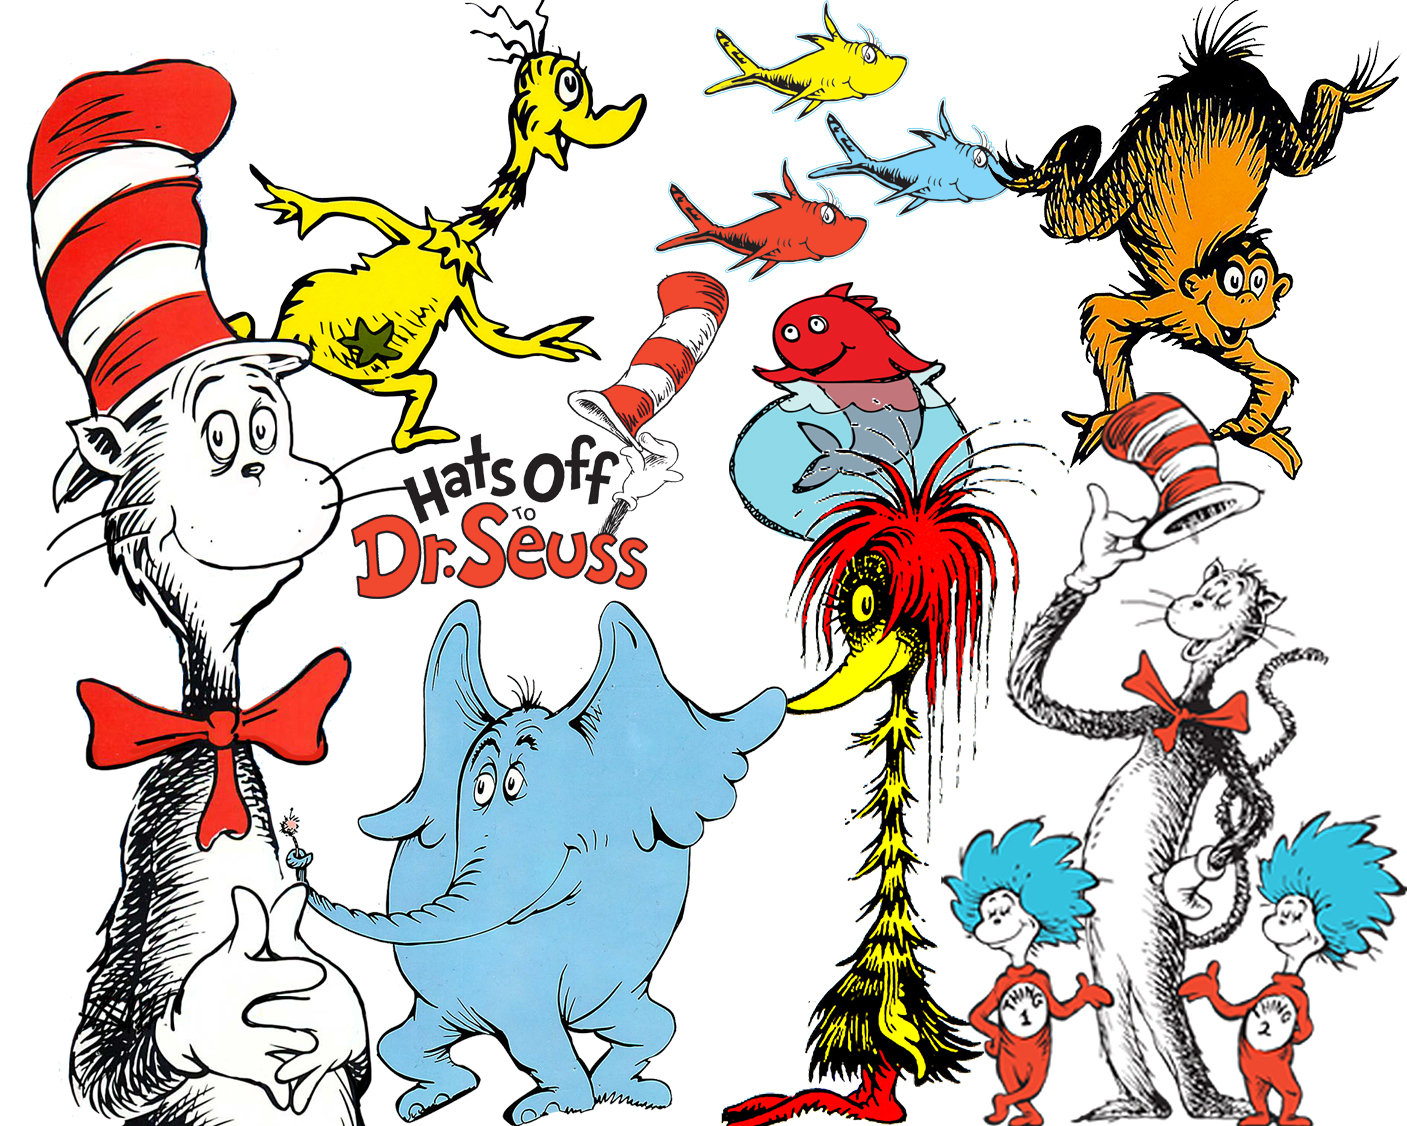 Blue Hair in Dr. Seuss's Illustrations - wide 1